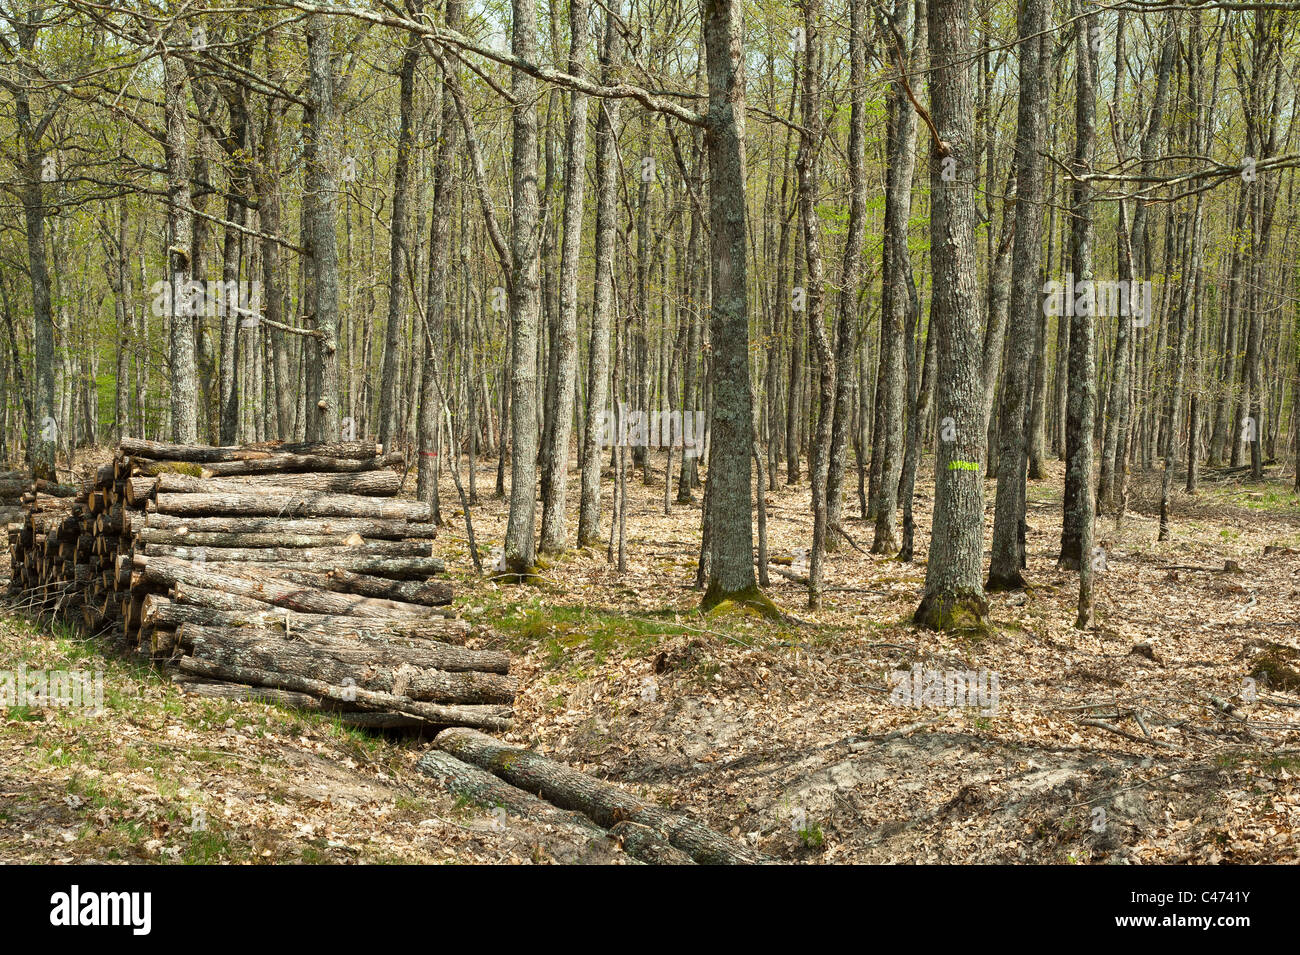 Woods stacked,  National Forest of Tronçais (03360 ), France. Stock Photo